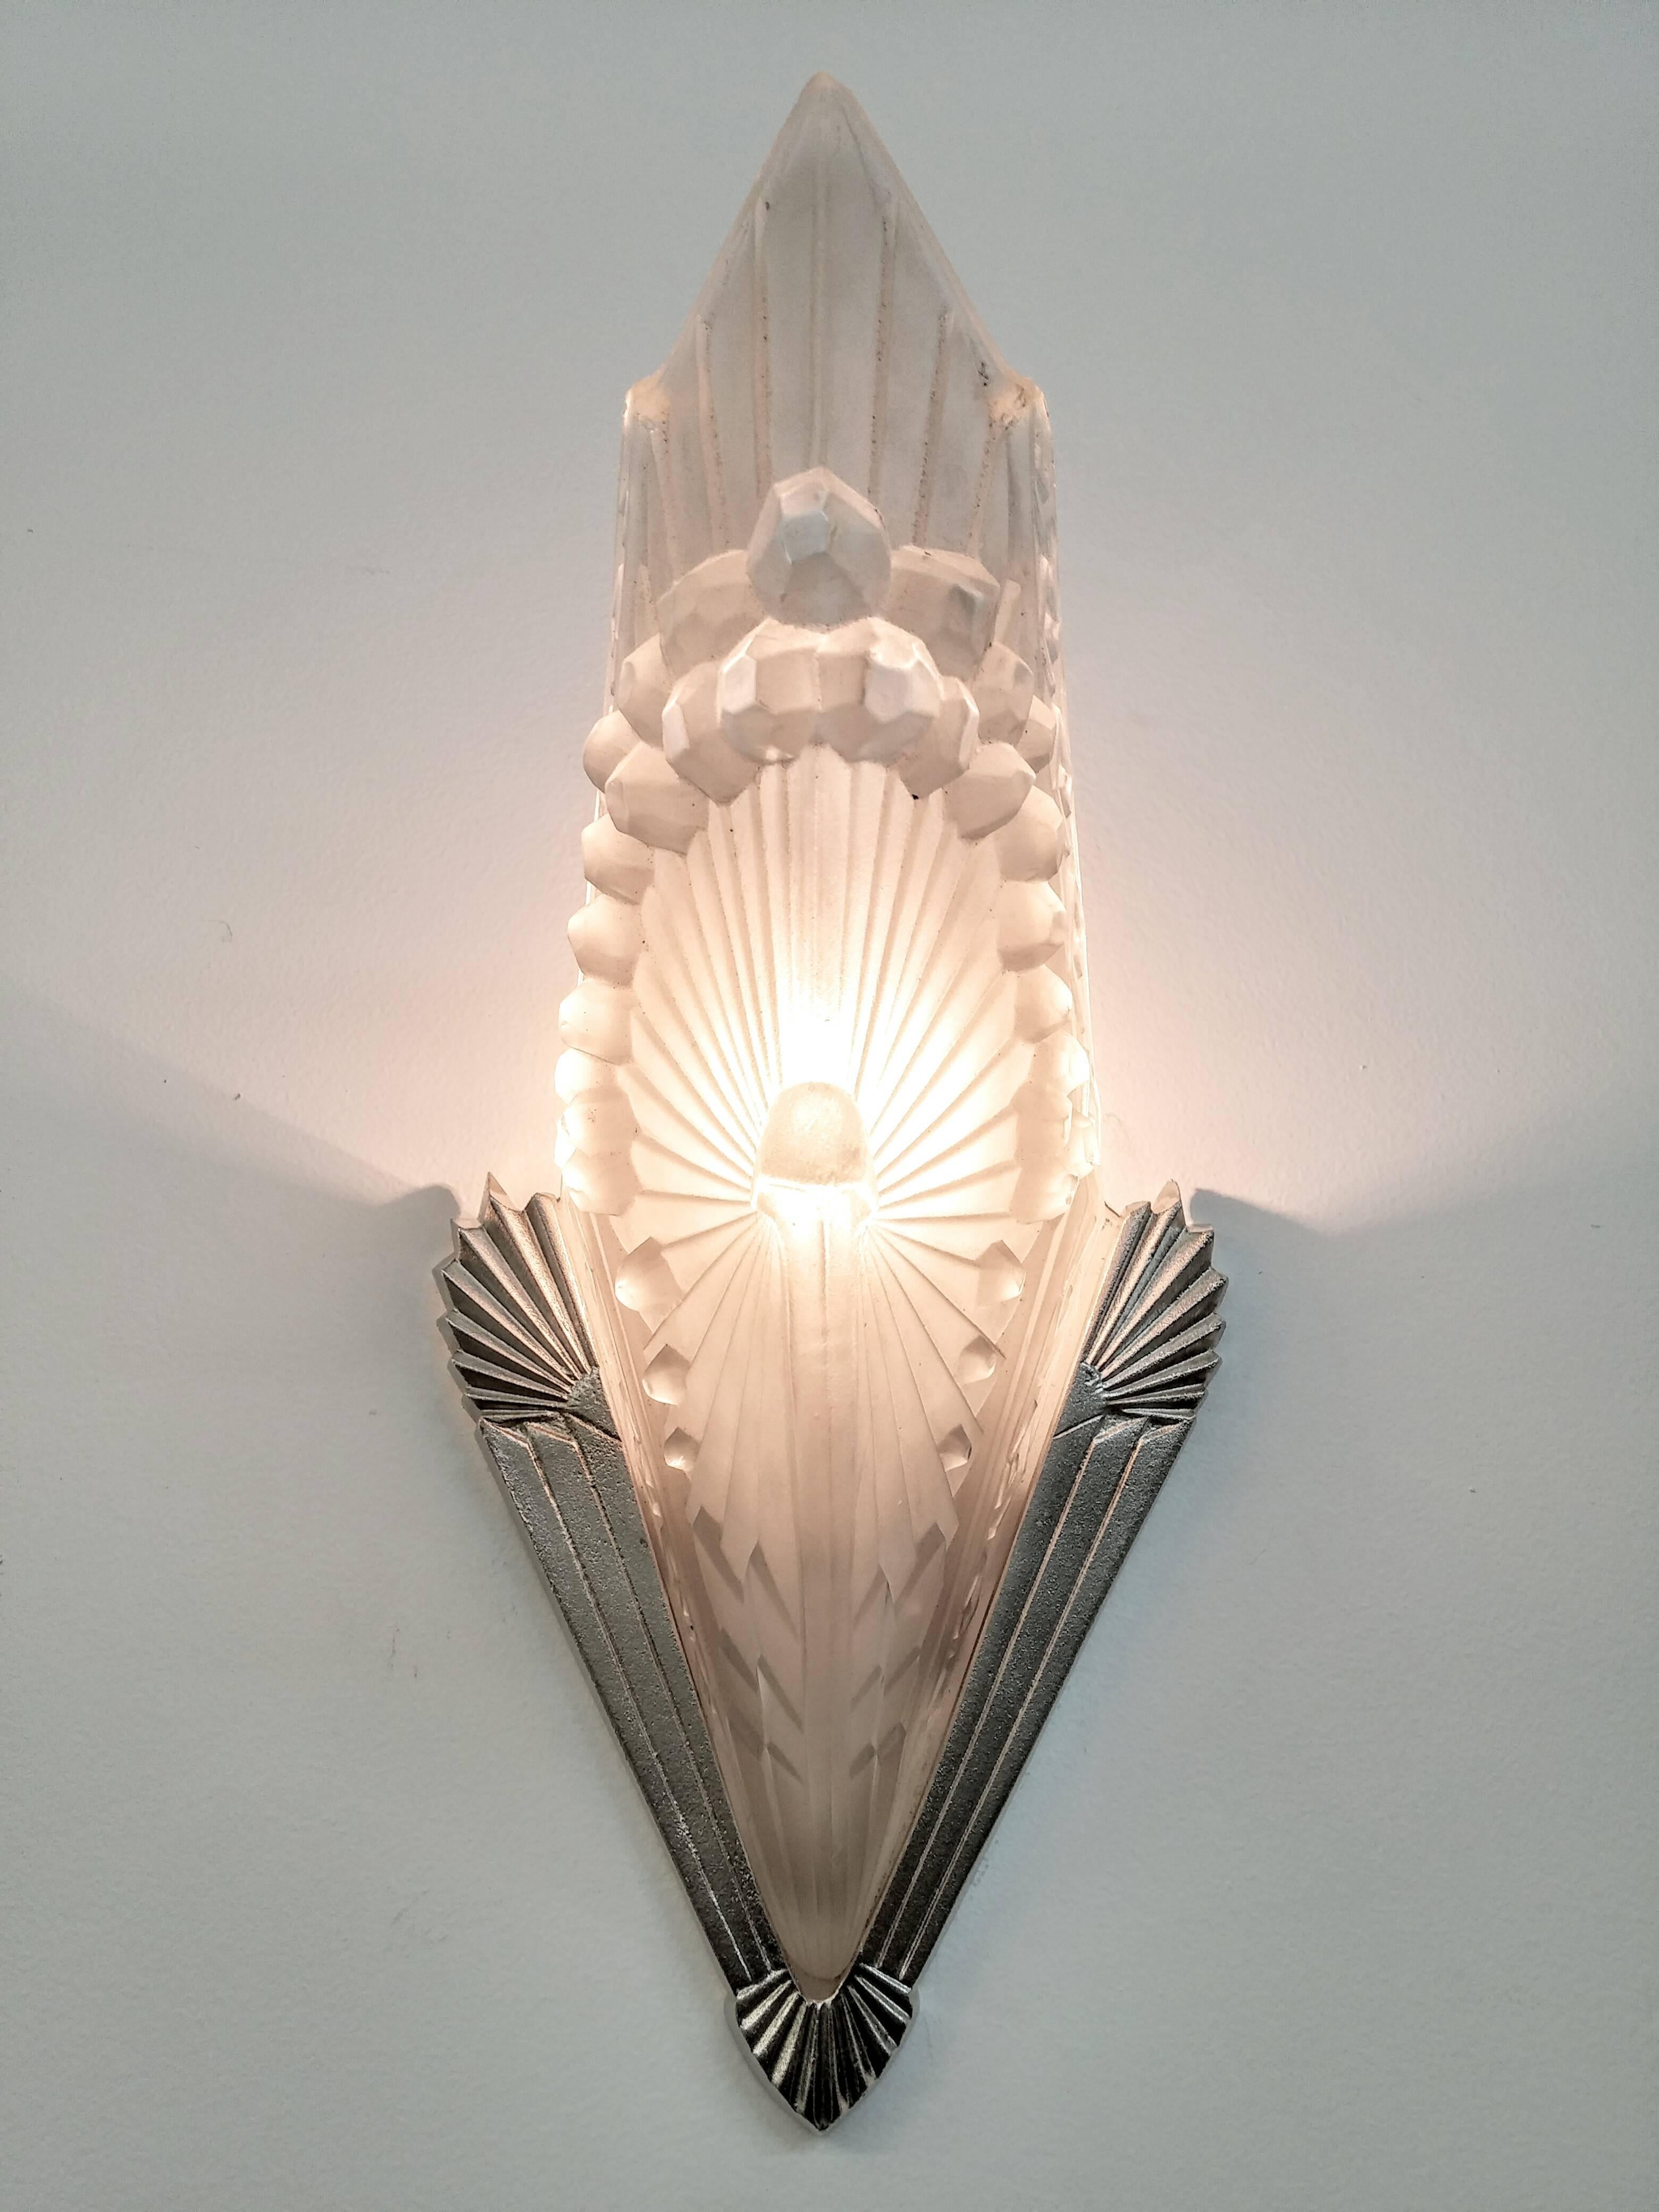 Stunning pair of French Art Deco sconces were created by the French artist 